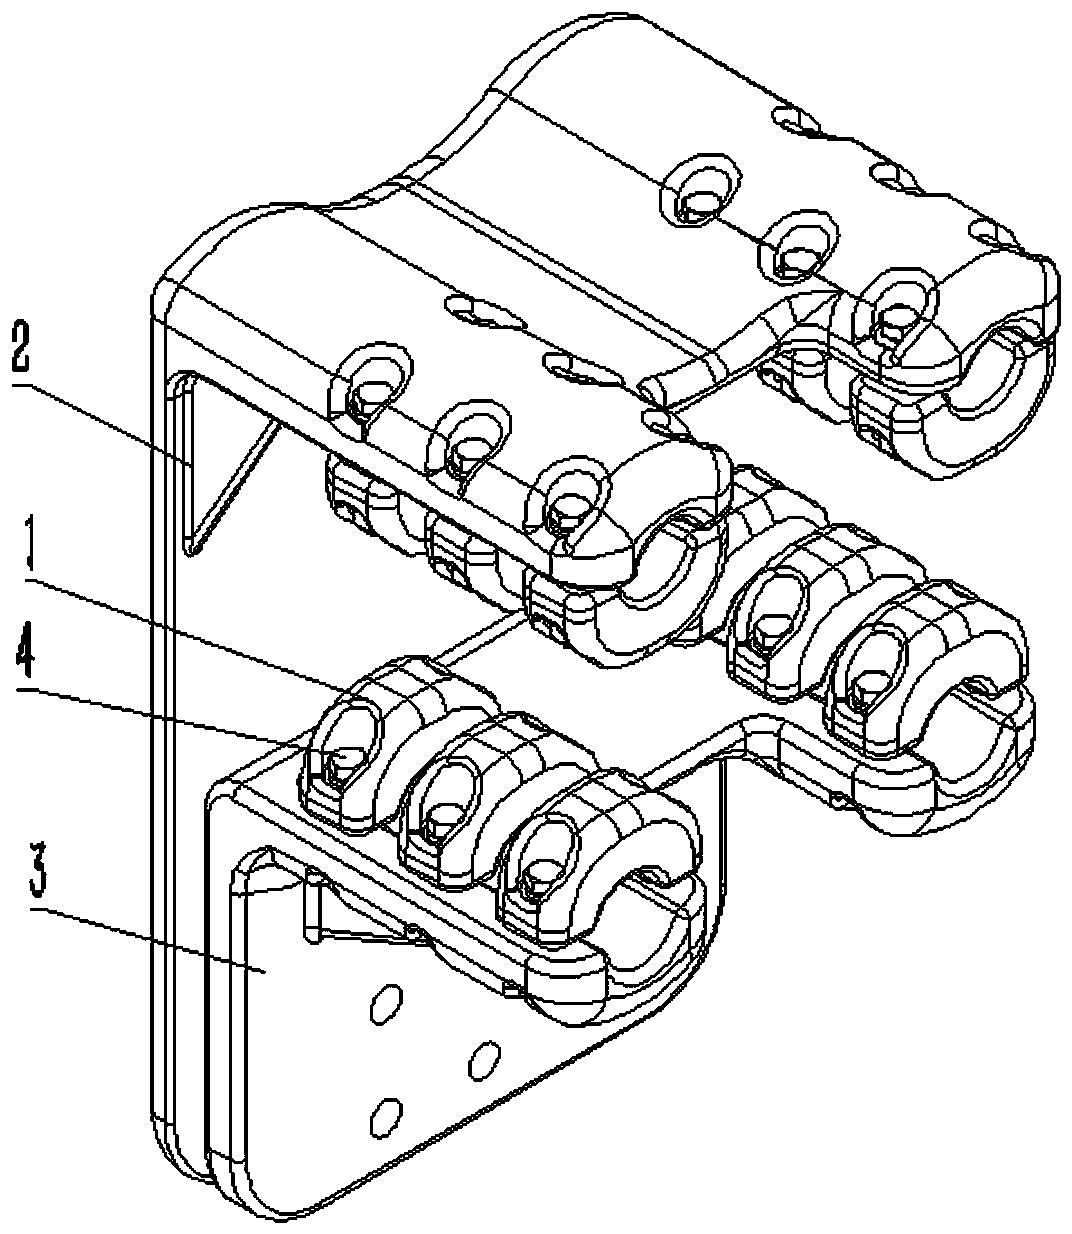 A kind of split wire clamp hardware